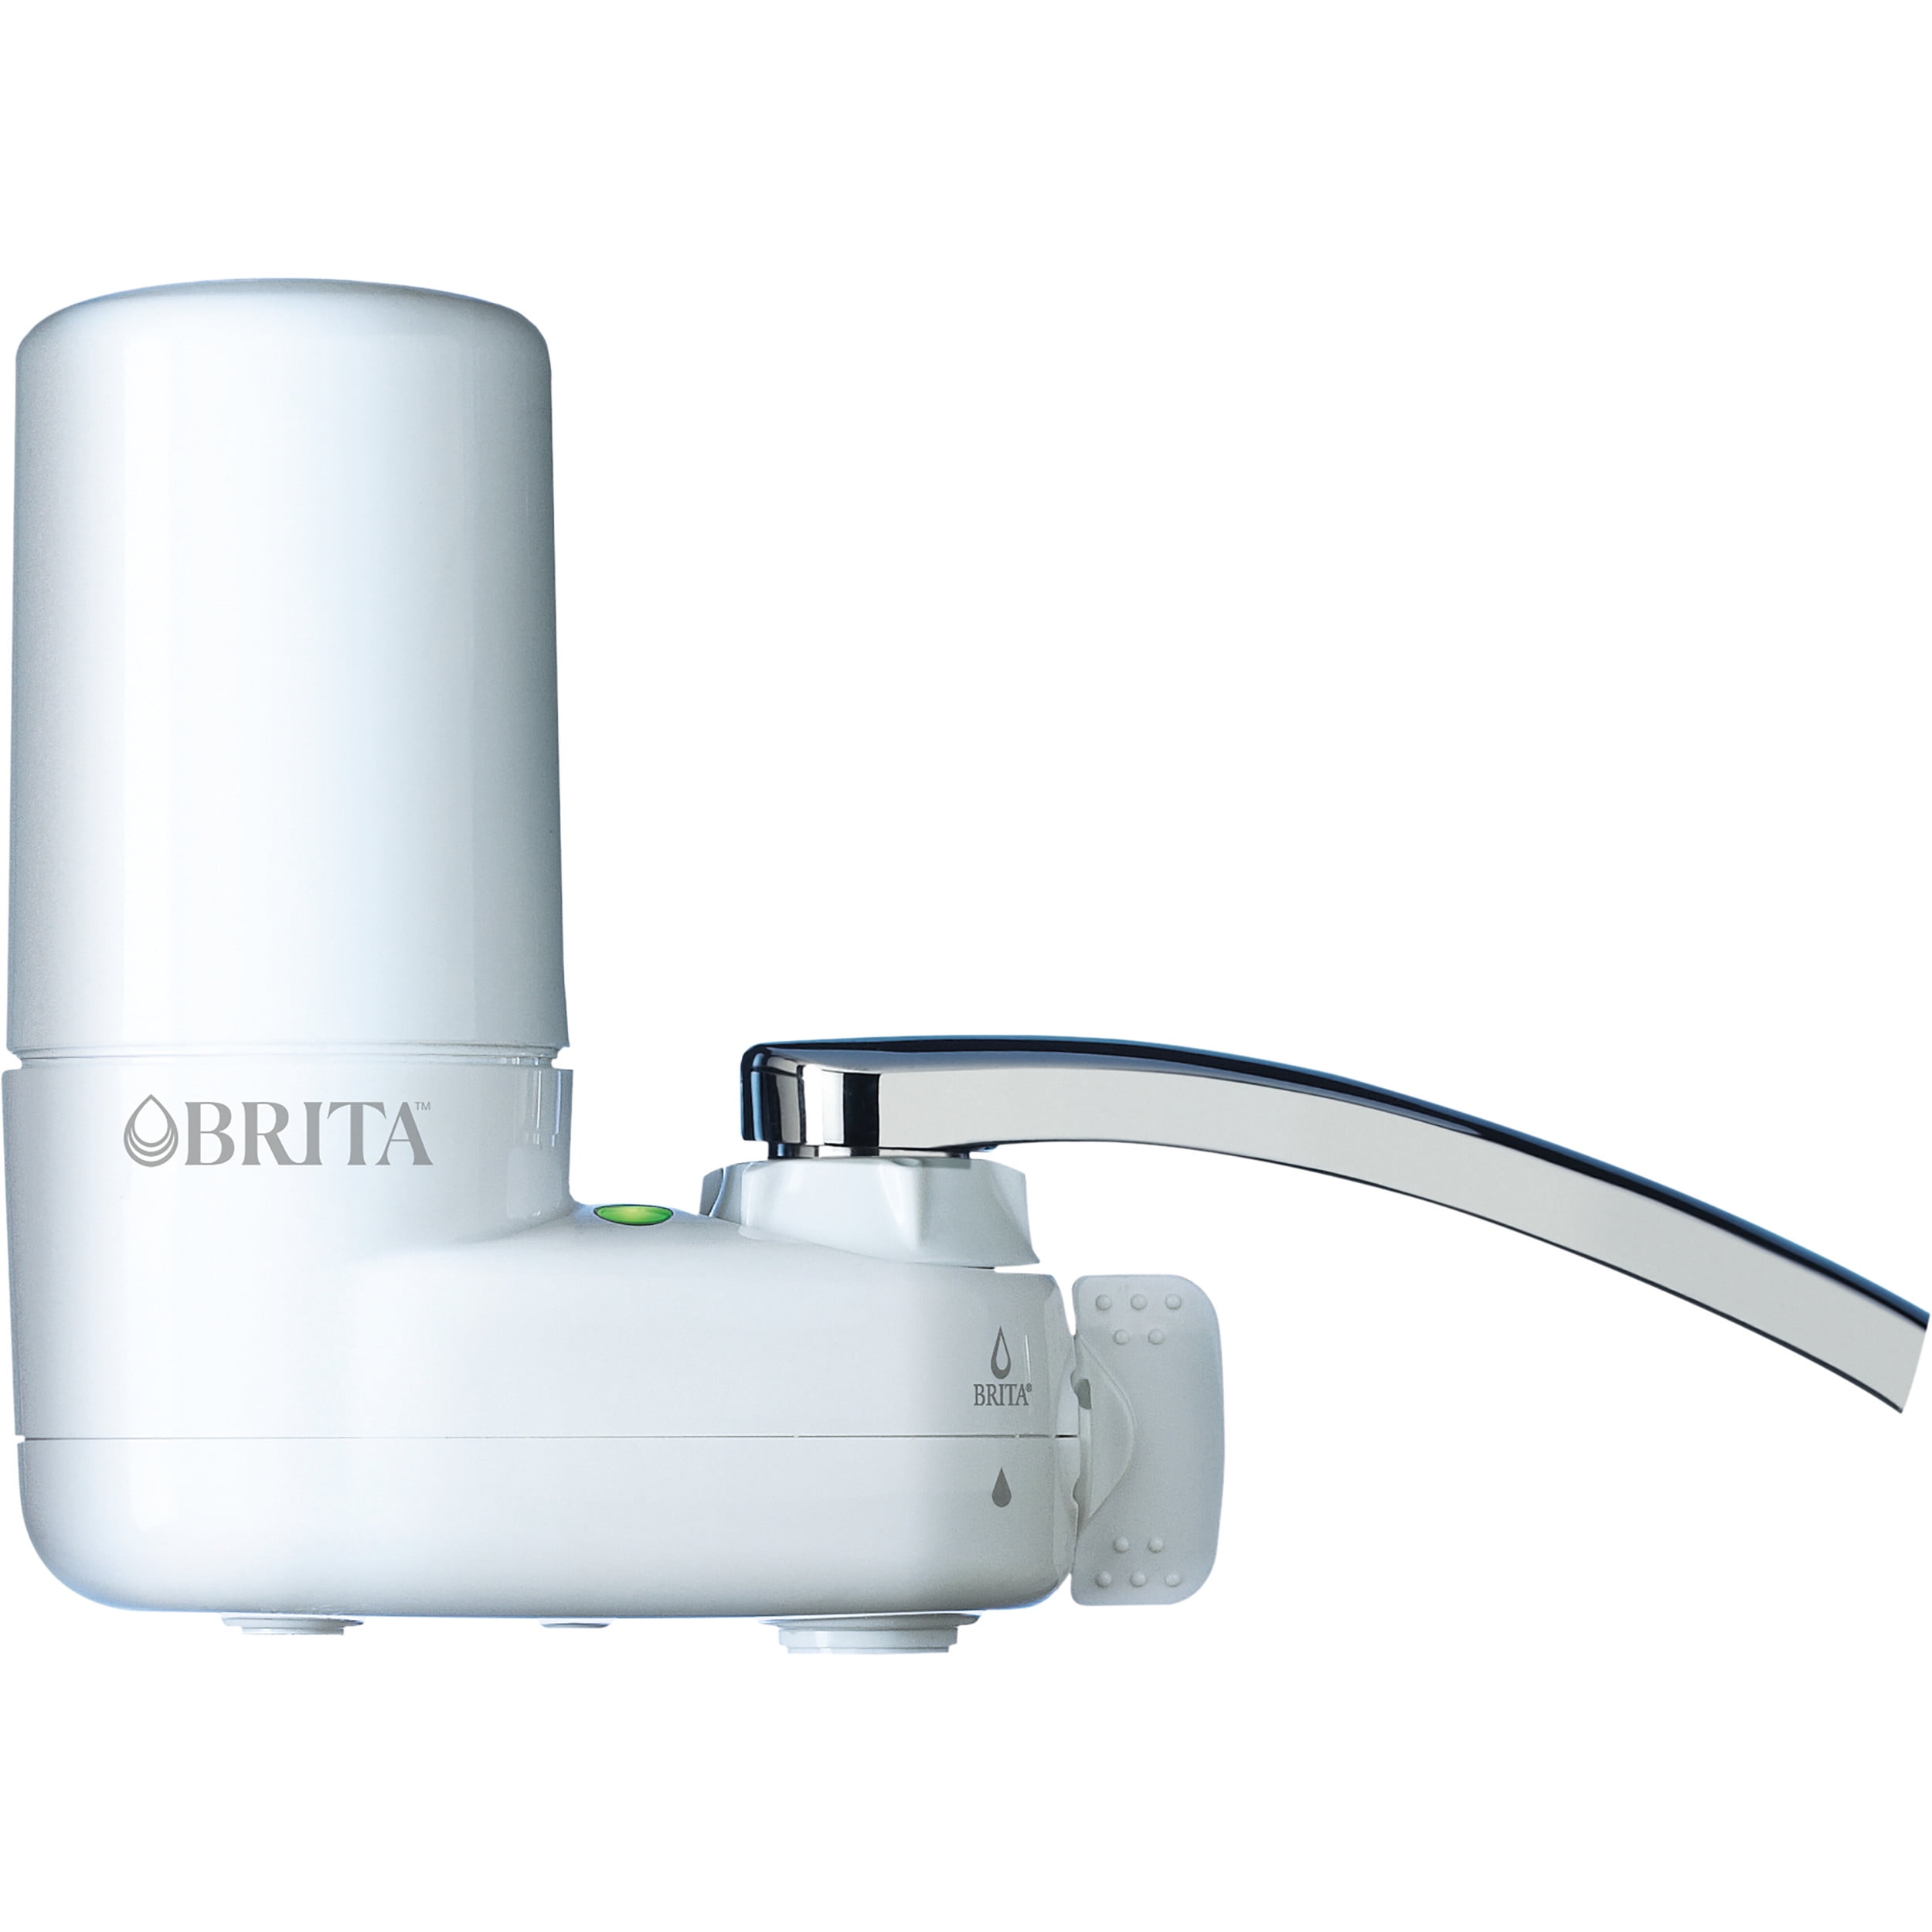 Clorox Brita On Tap Faucet Water Filter System, White, COX42201